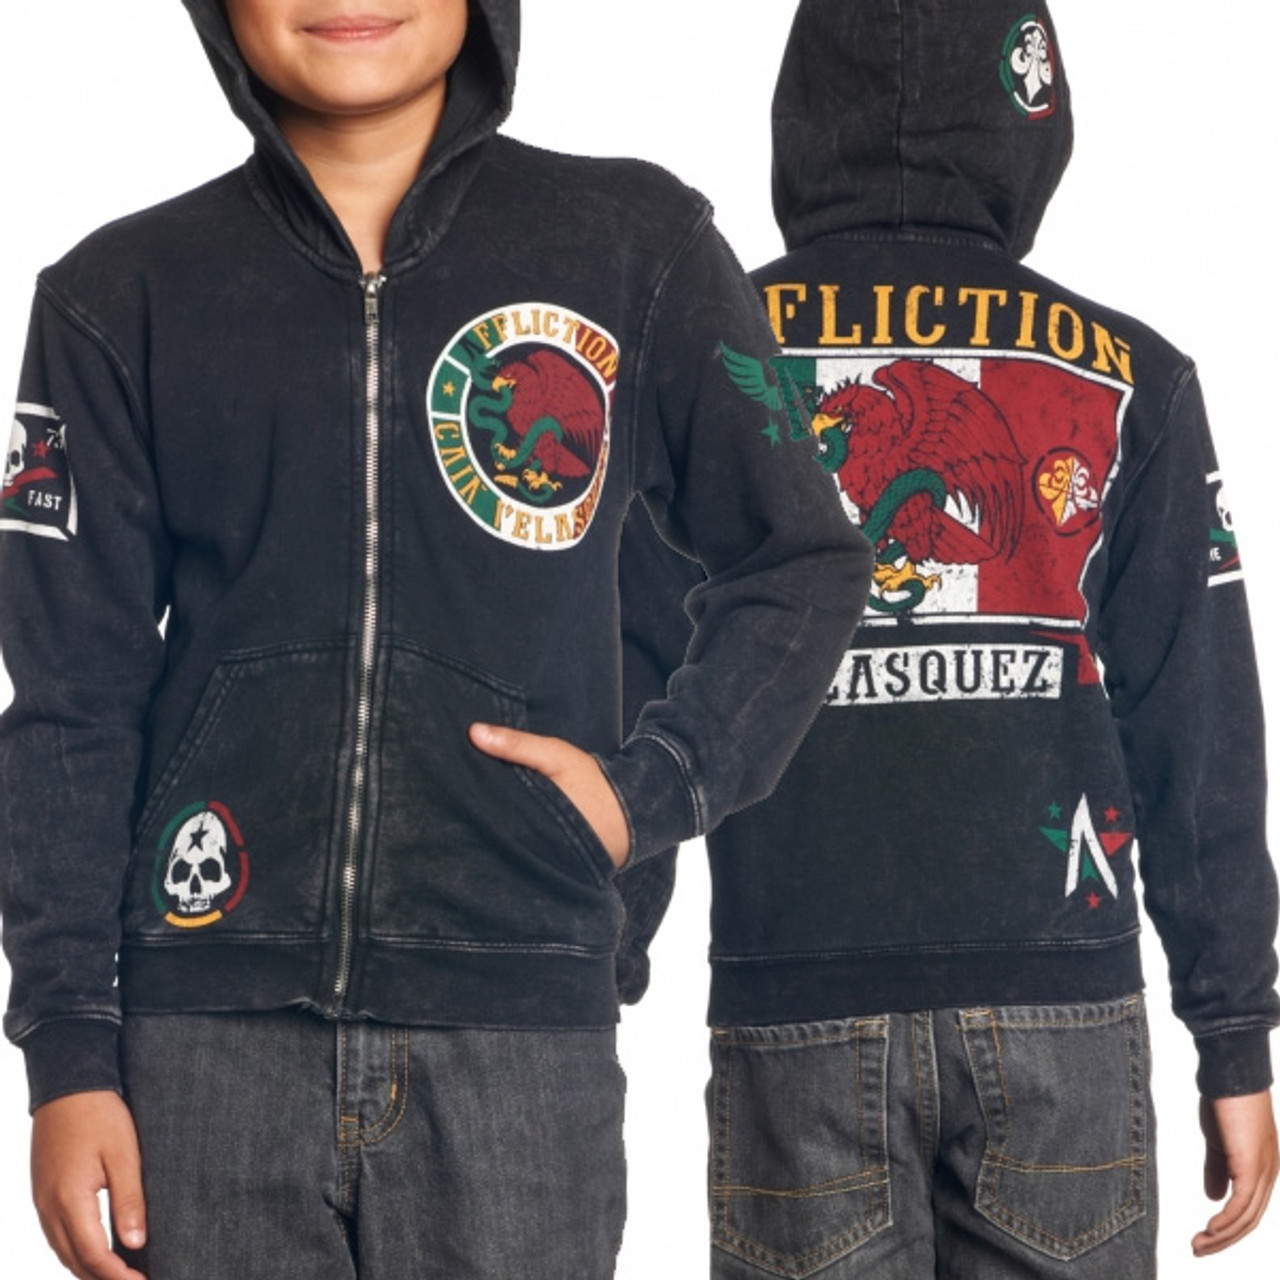 Affliction Cain Velasquez Youth Hoodie Discount Sale best quality